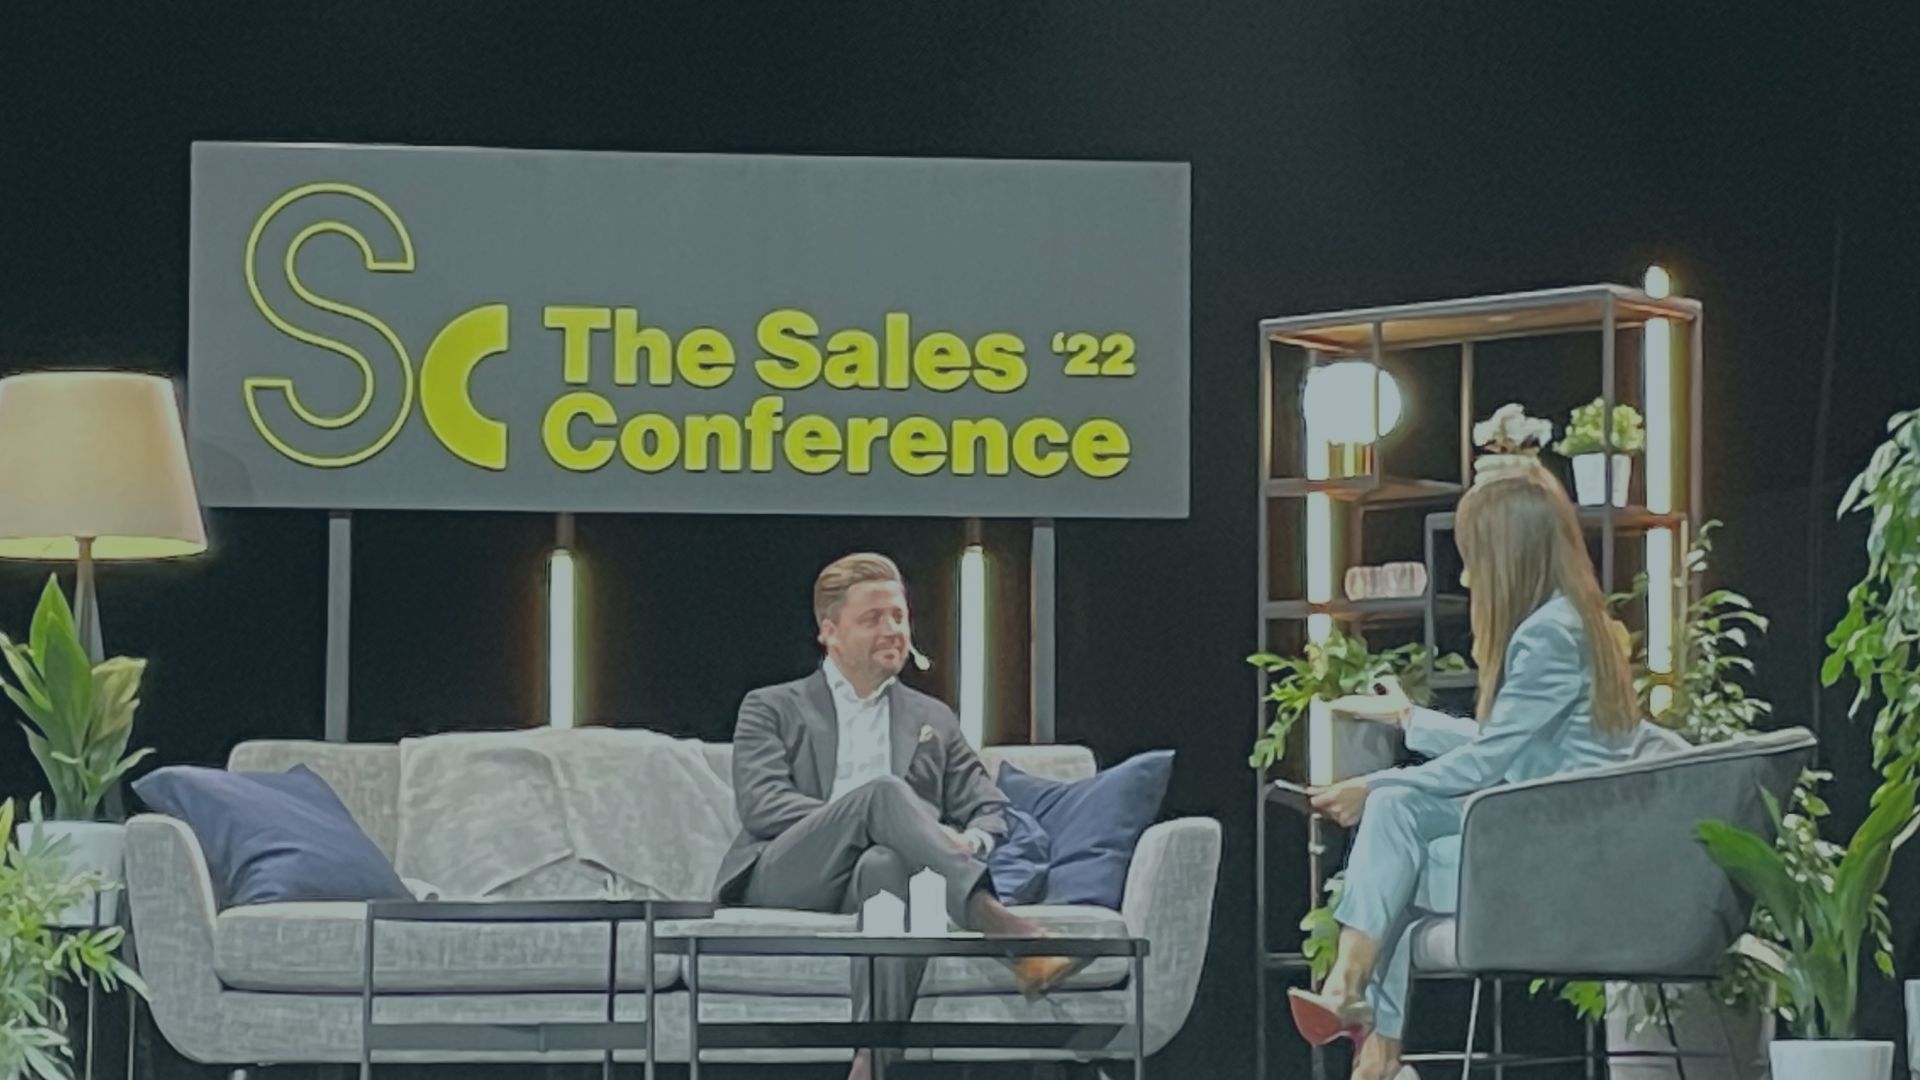 The Sales Conference